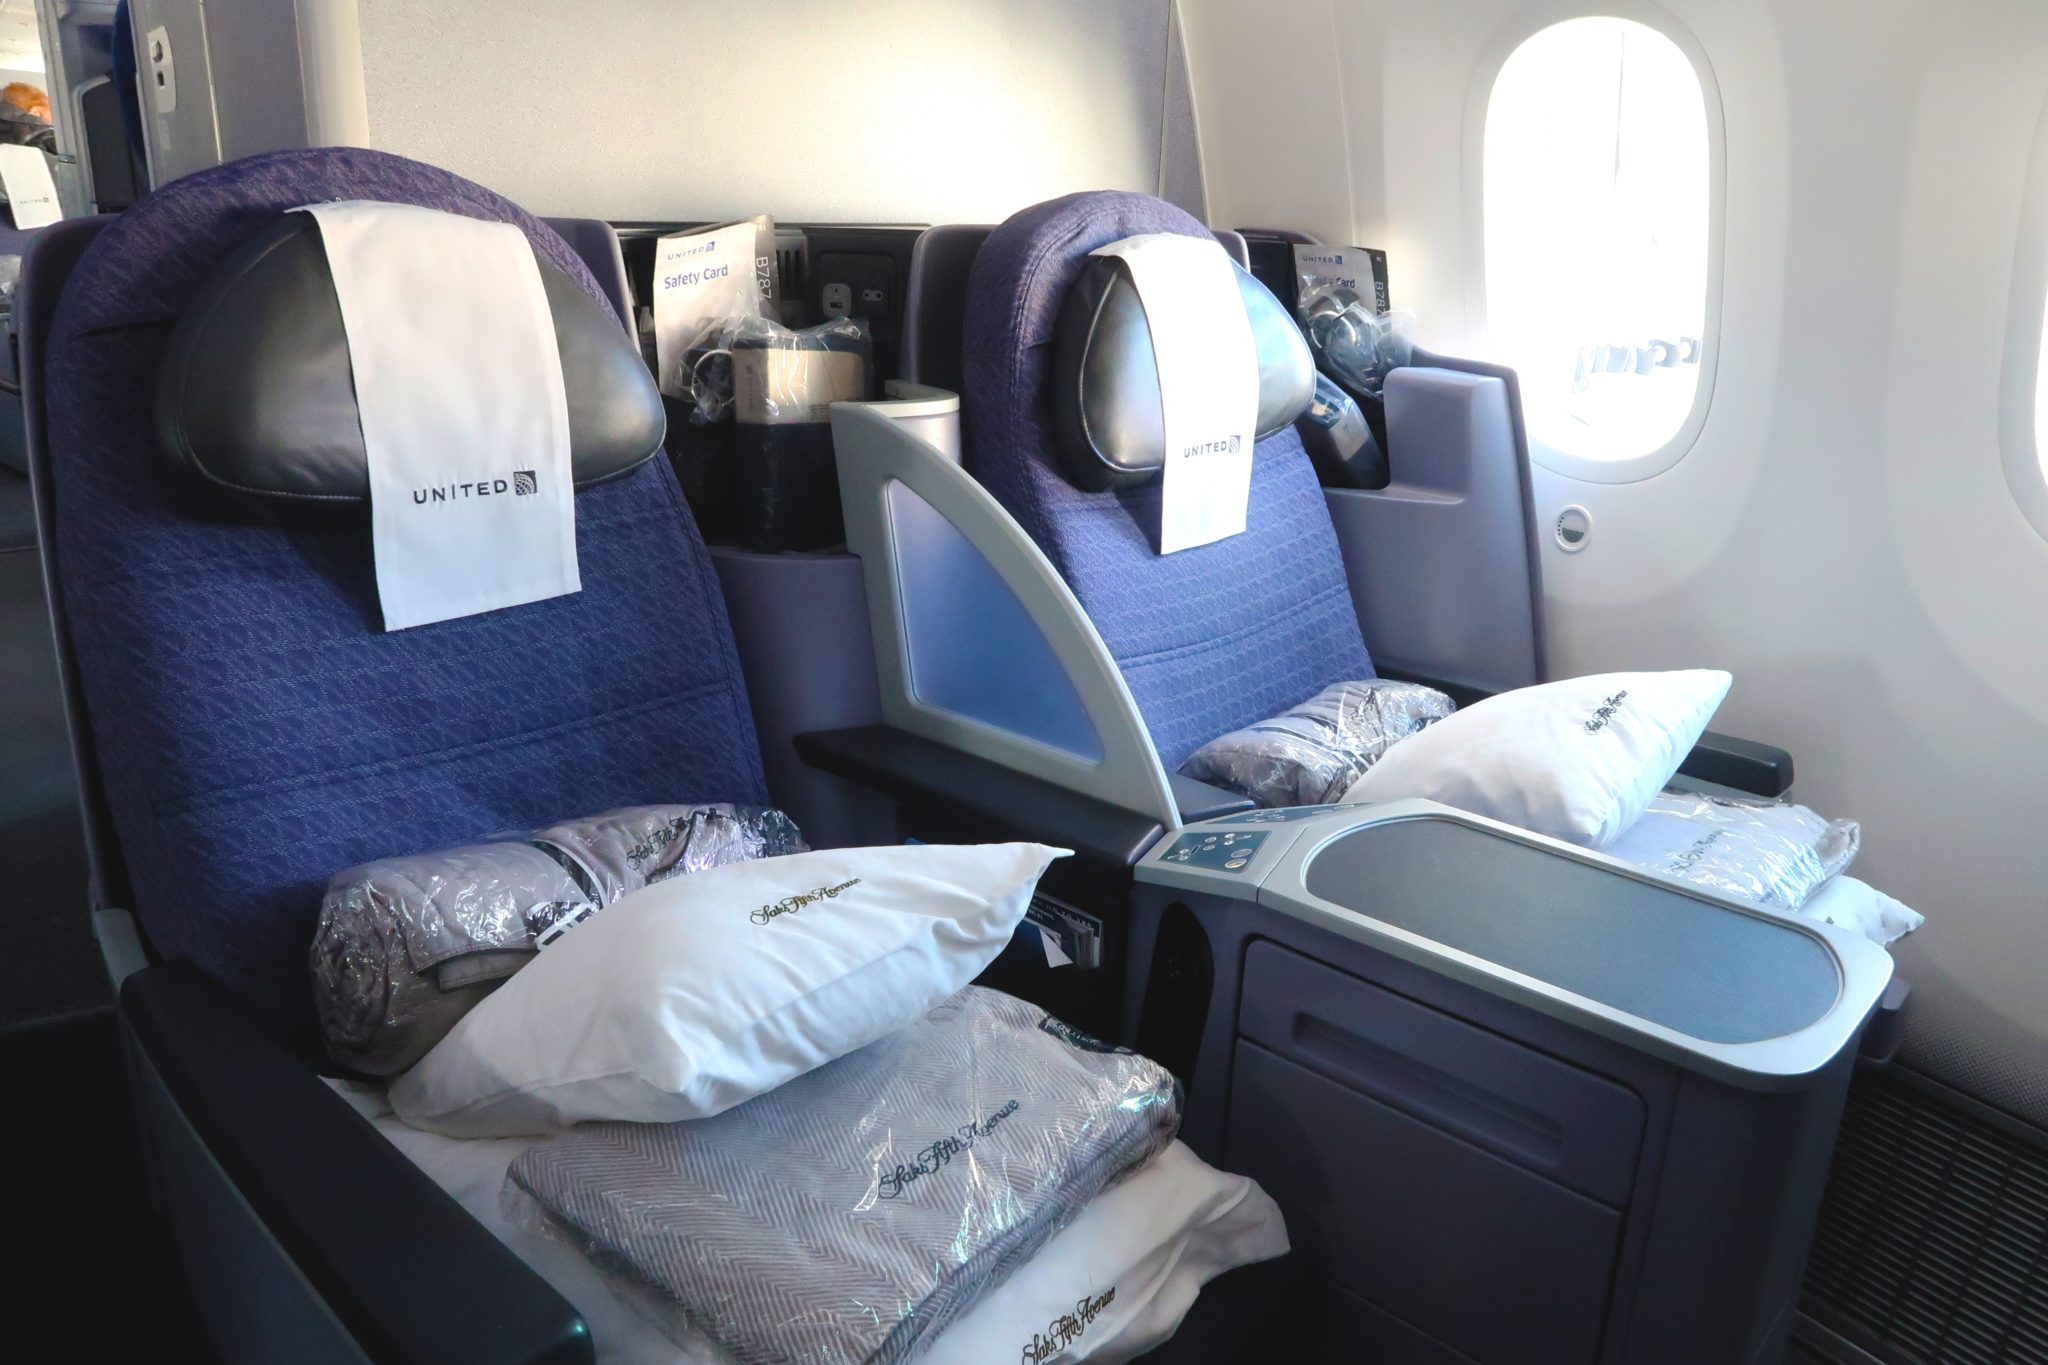 Best Chase credit cards for 2023 - United Polaris Window Seat